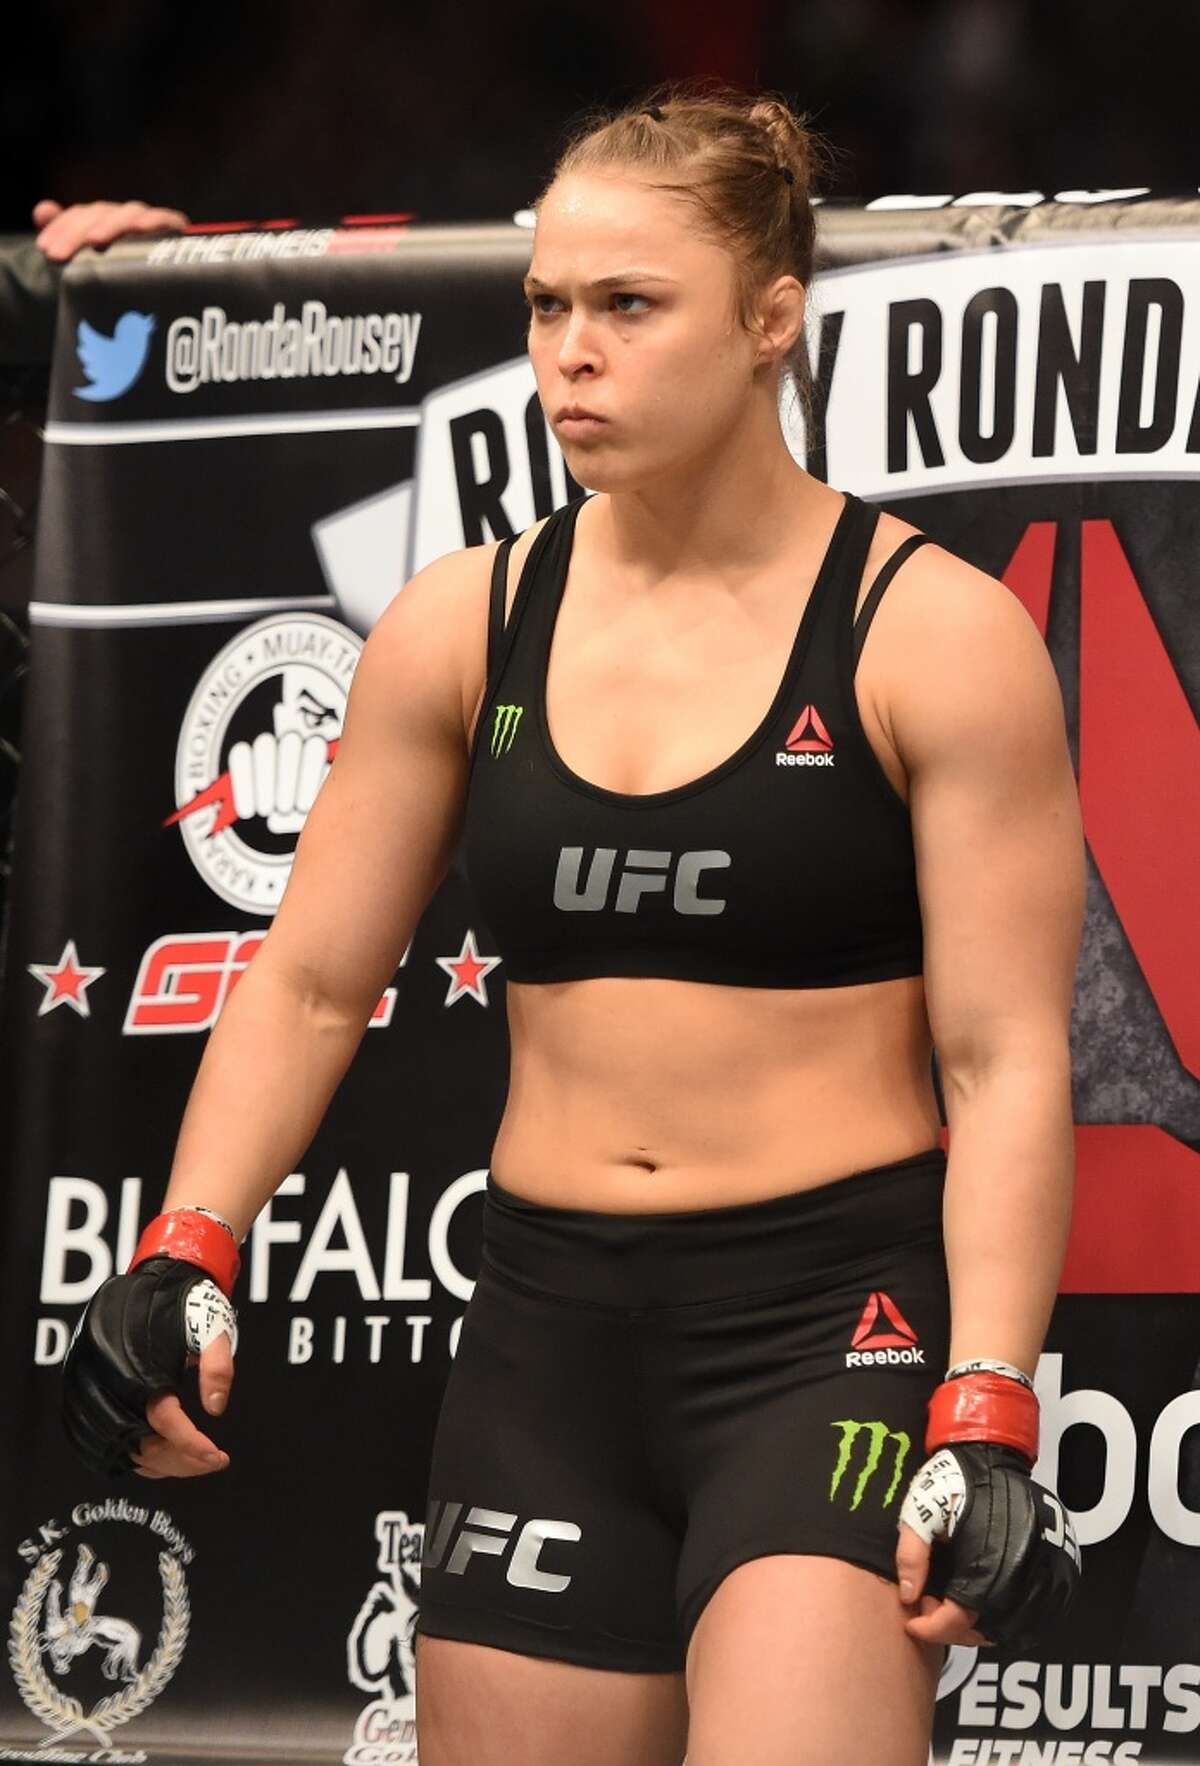 UFC Champ Ronda Rousey got hit in the face by opponent during weighin